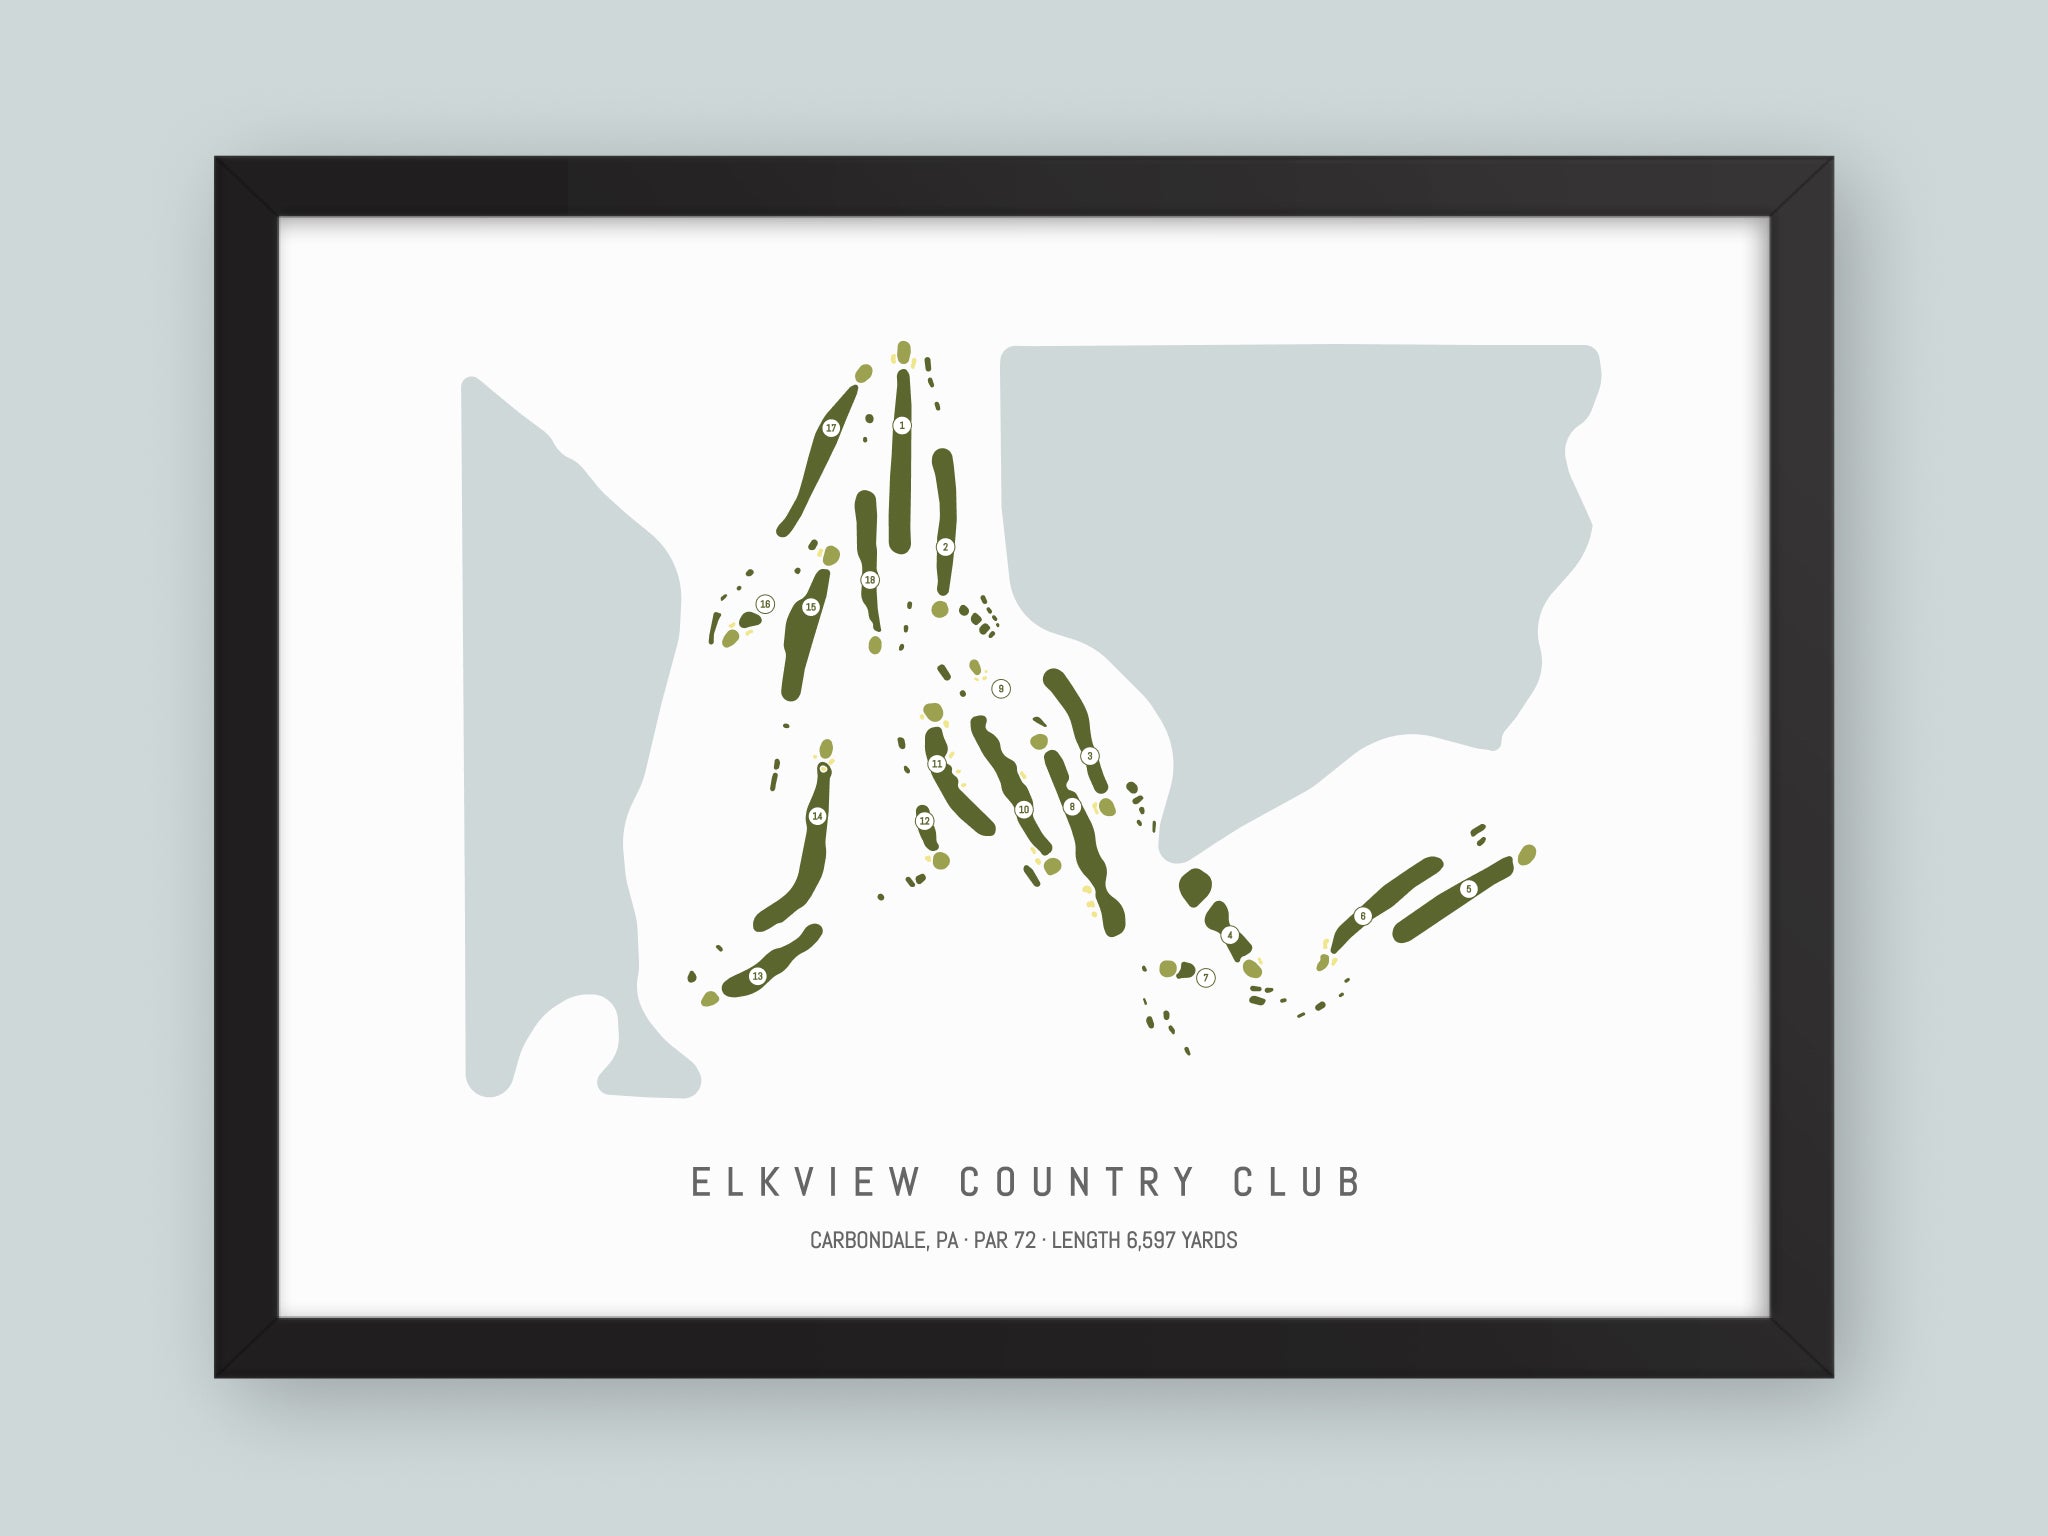 Elkview-Country-Club-PA--Black-Frame-24x18-With-Hole-Numbers